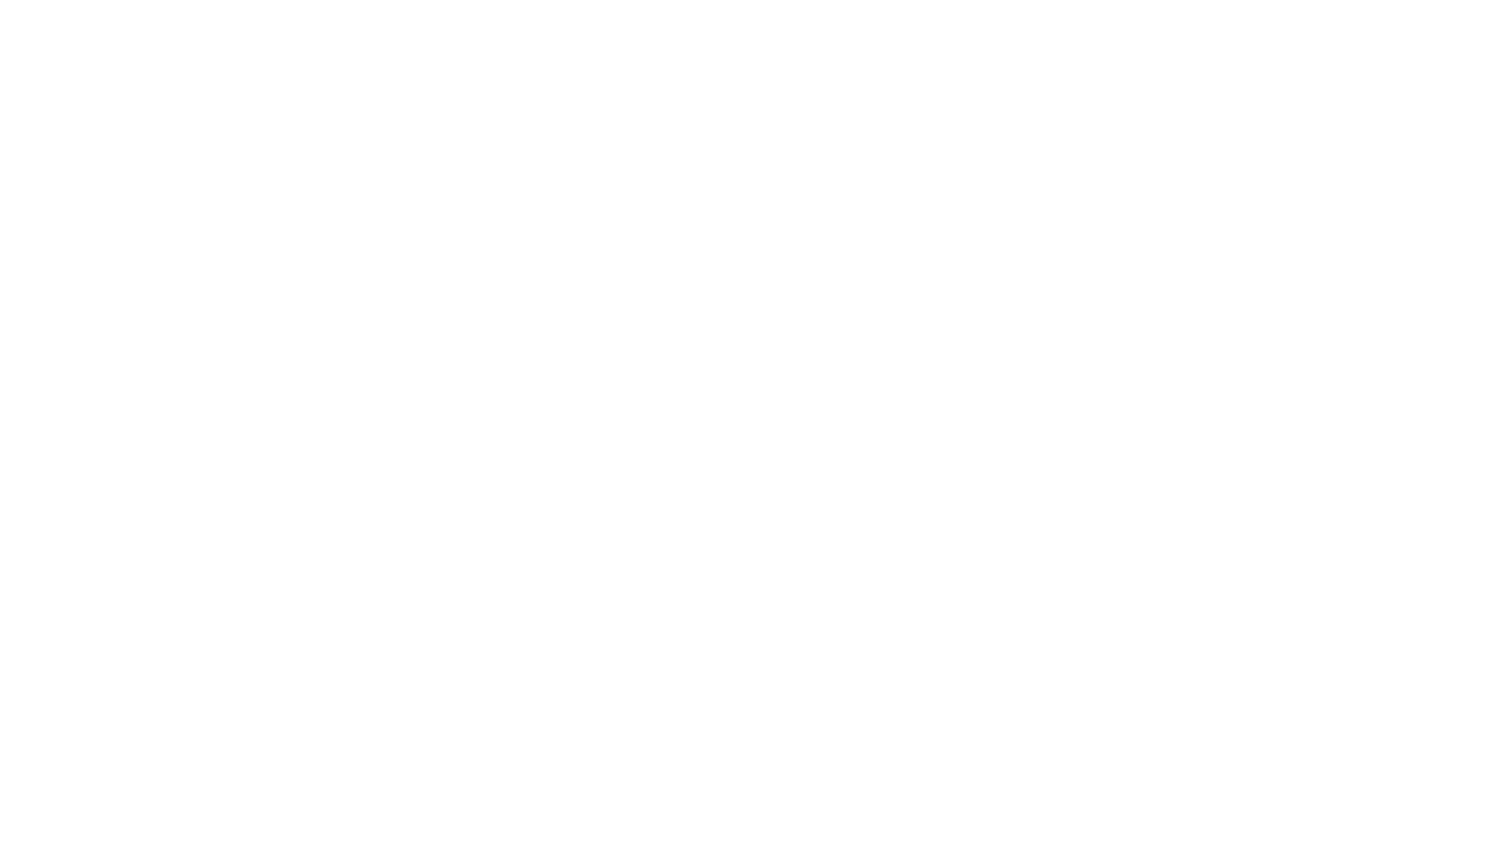 Sonya Shearer Consulting Services